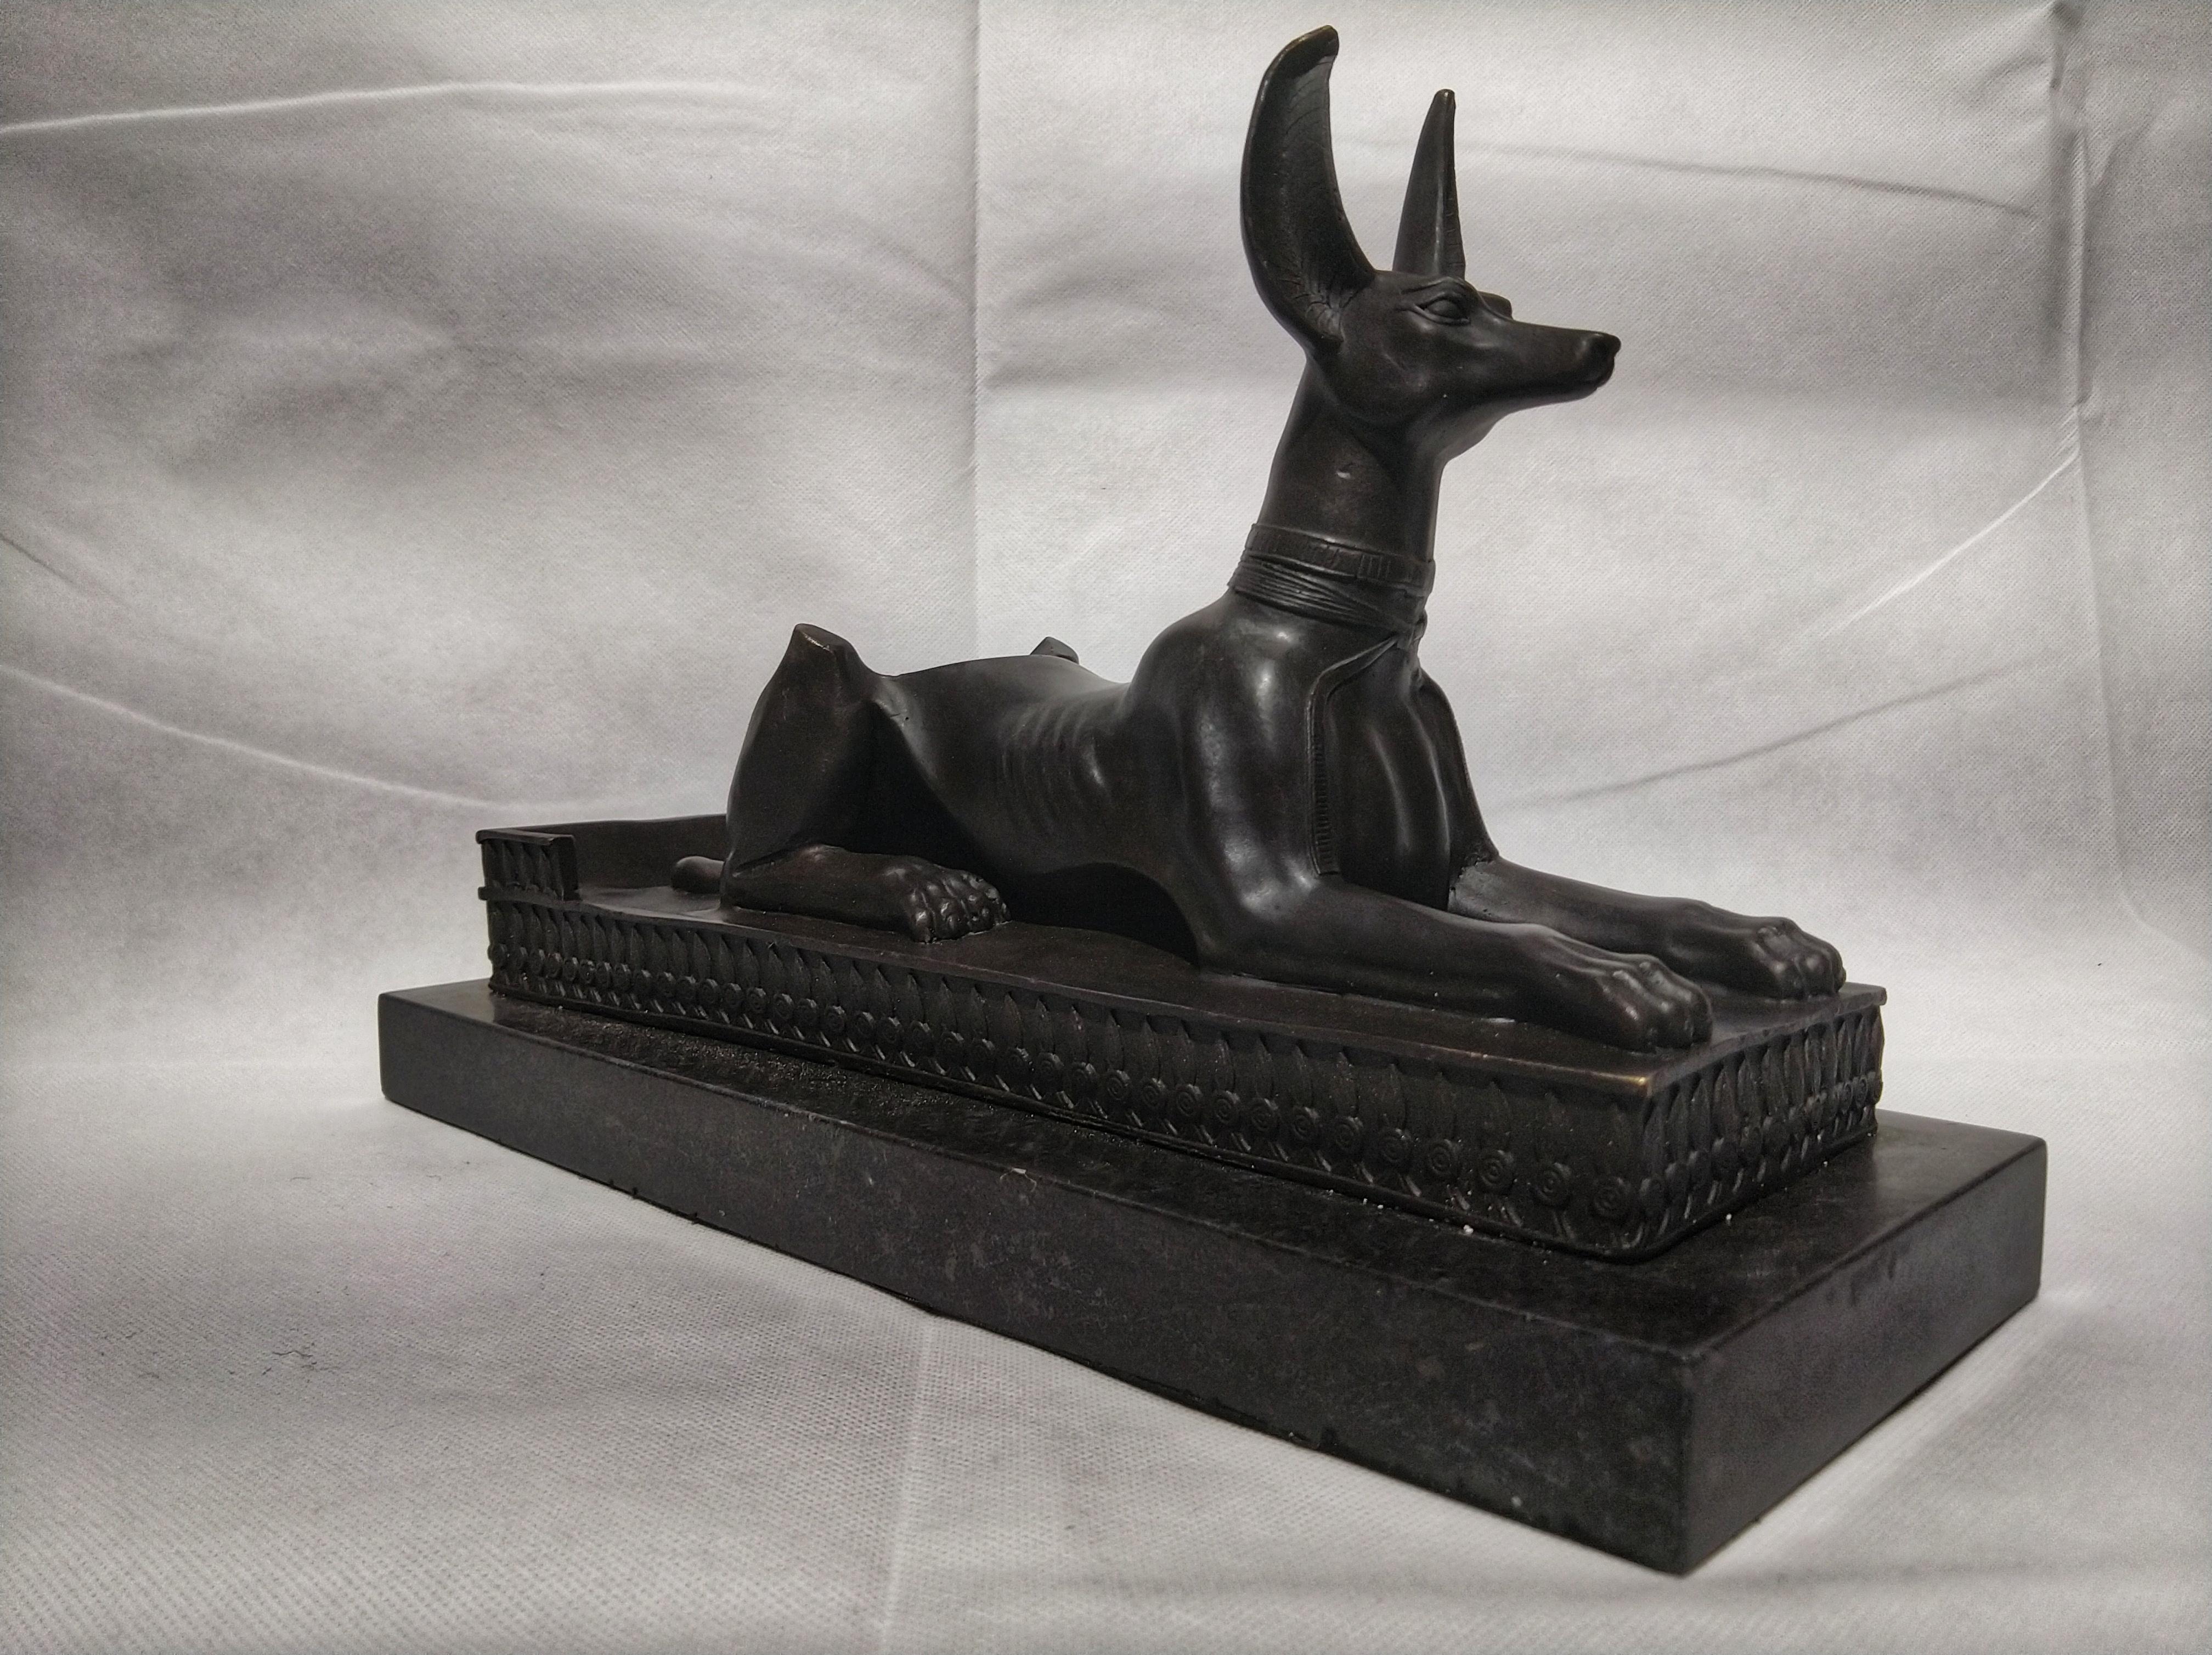 Beautiful Art Deco style sculpture bottle holder, depicting Anubis Sphinx (Egyptian God of mummification). And is sitting on a black marble base.

Anubis is the Greek name of a god associated with mummification and the afterlife in ancient Egyptian